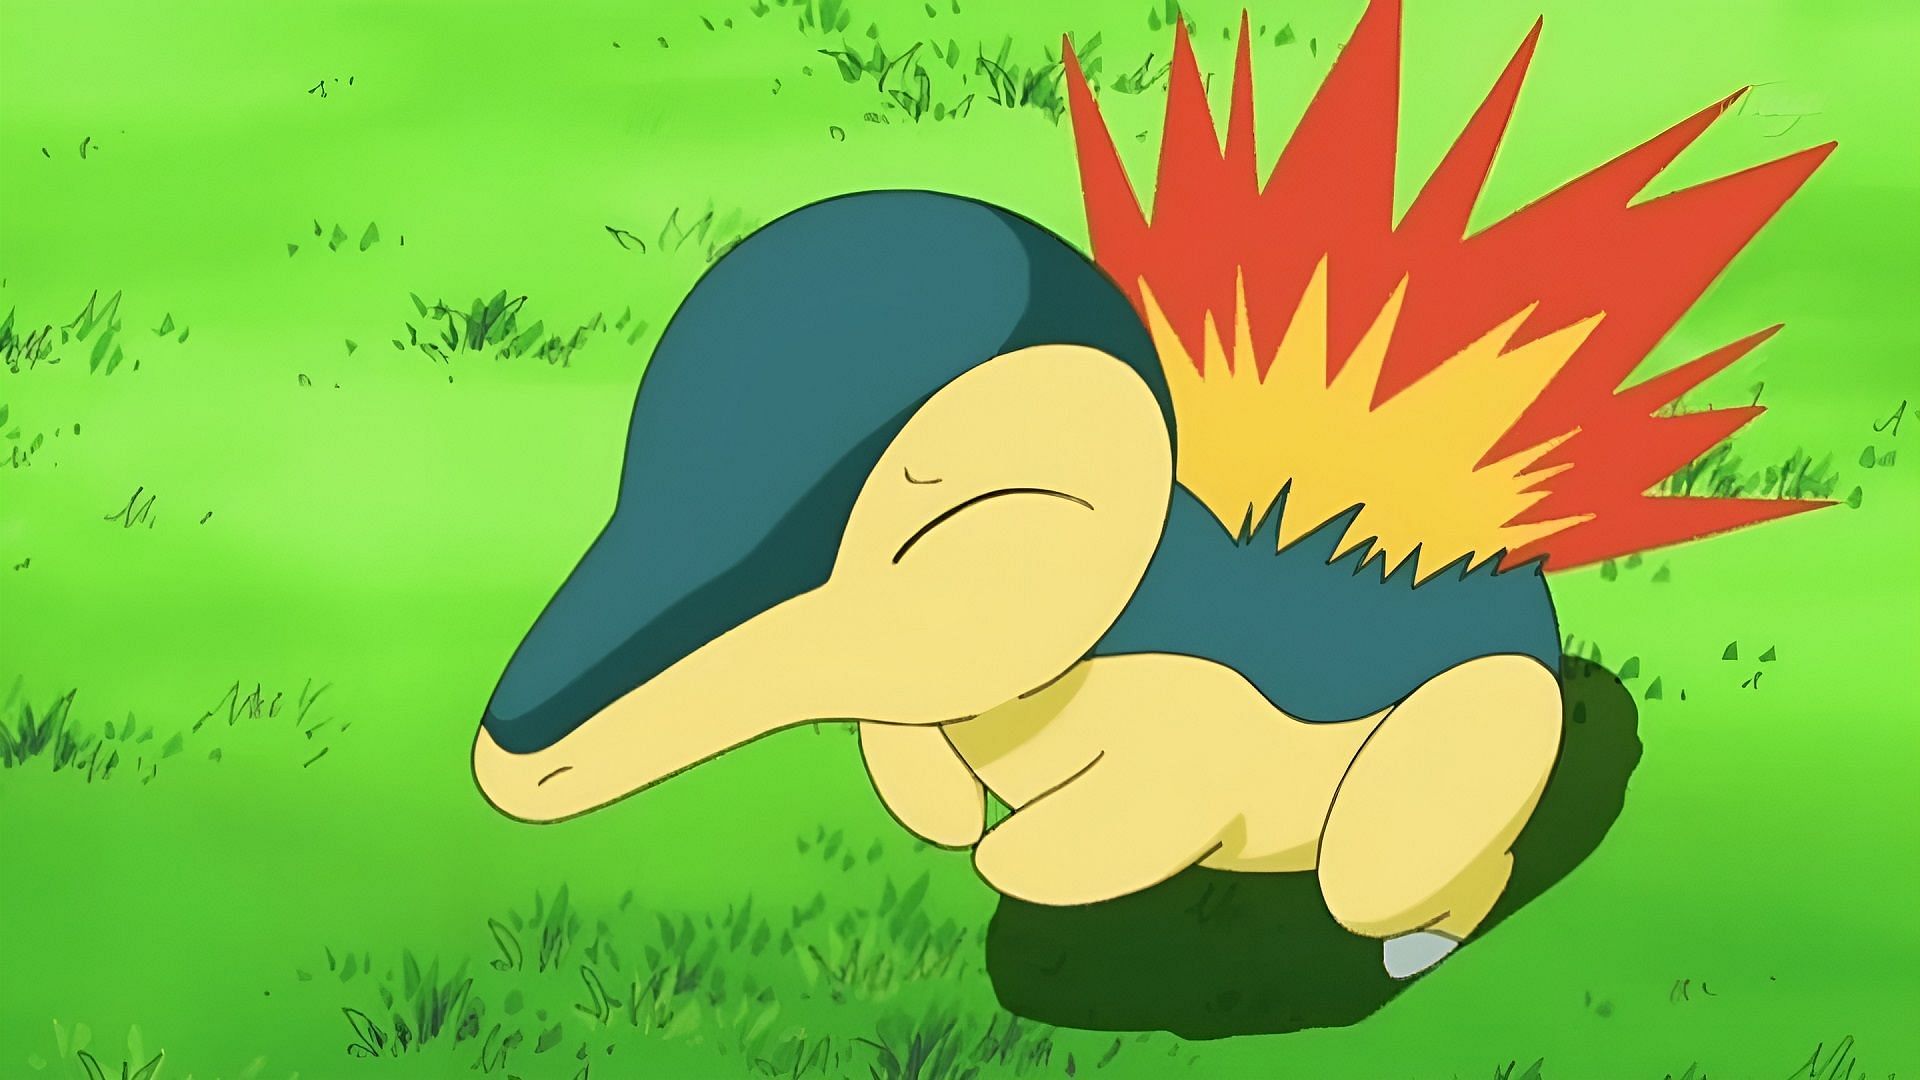 Cyndaquil [First Partner Pack]